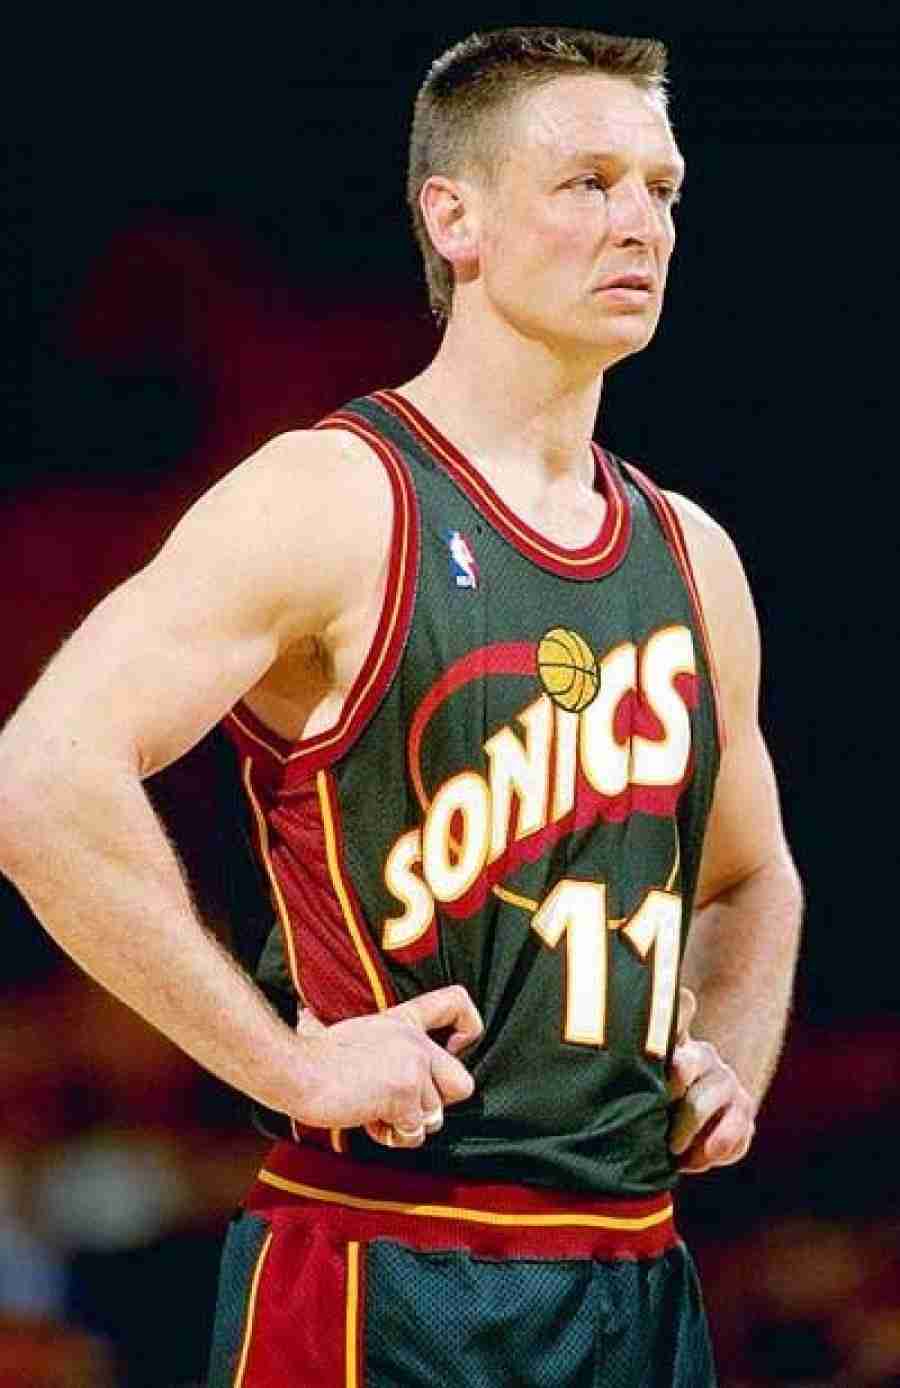 Not in Hall of Fame - 26. Detlef Schrempf